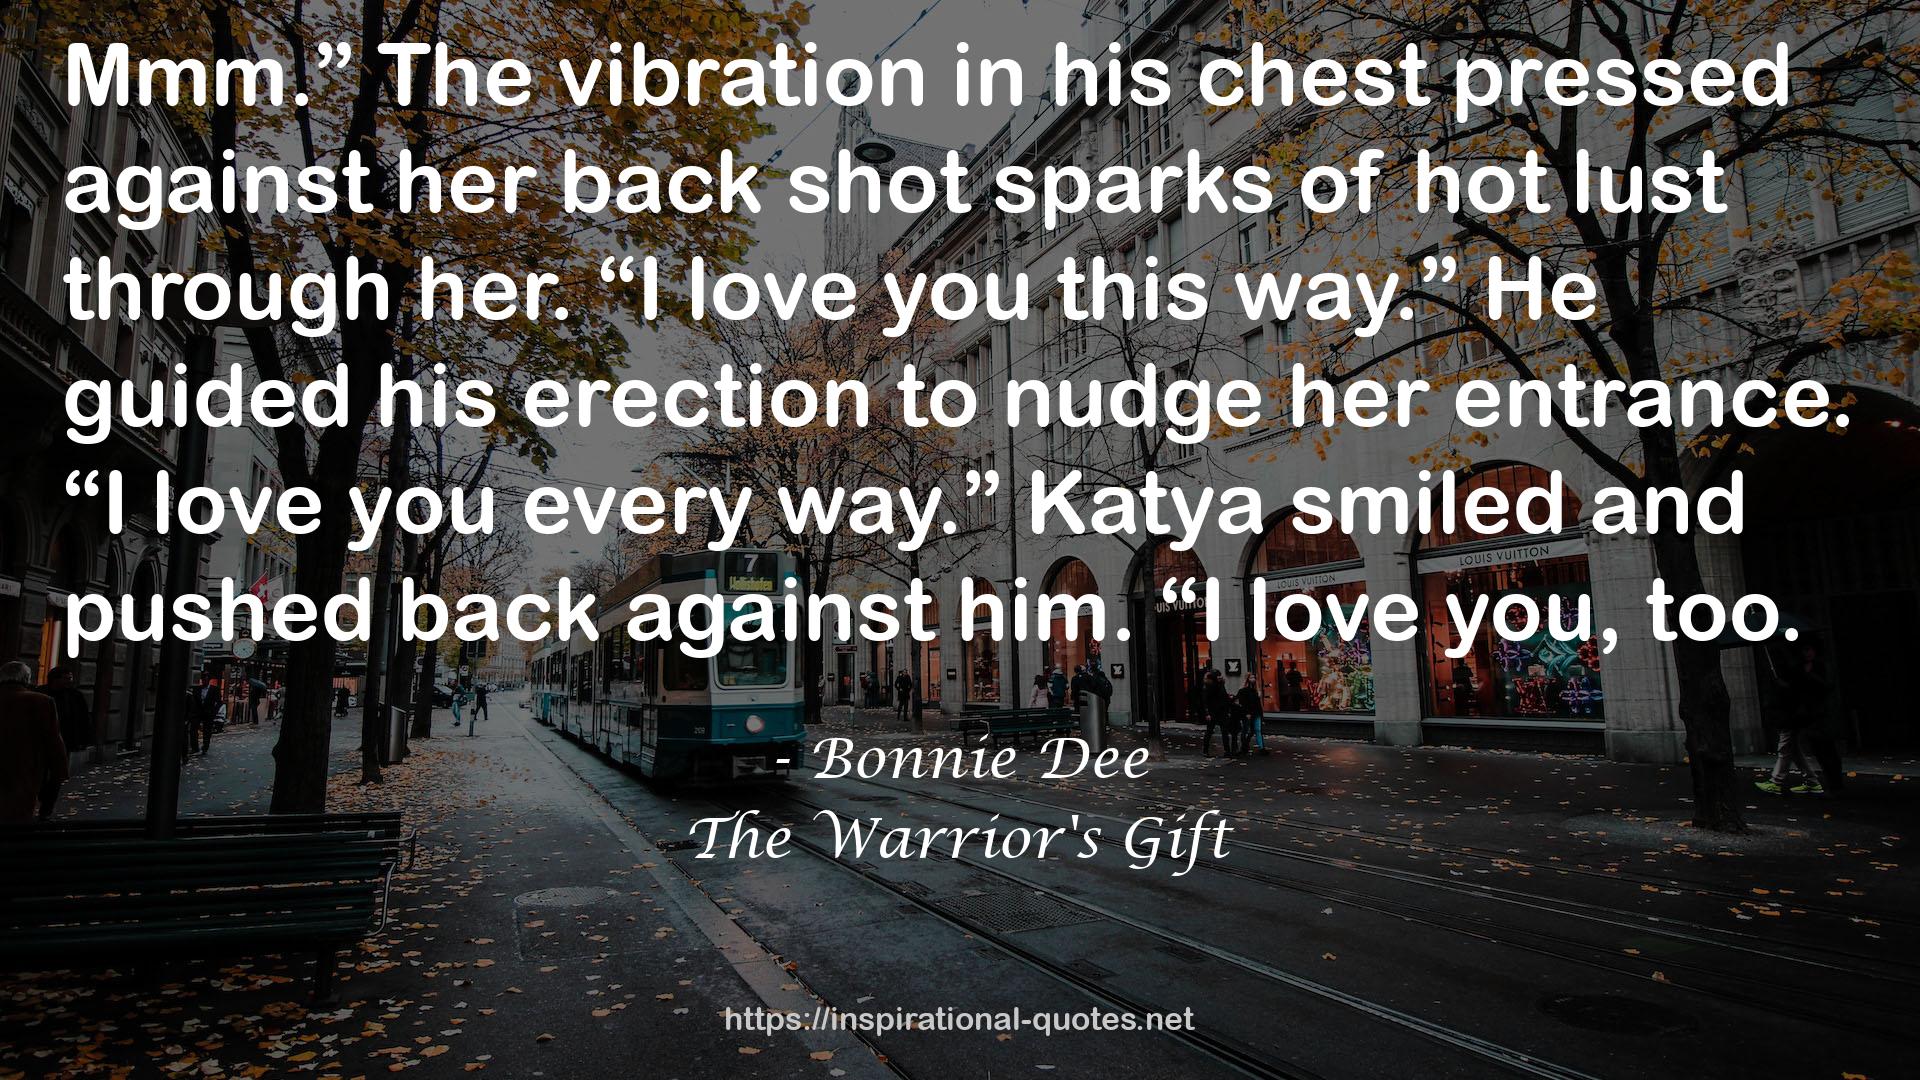 The Warrior's Gift QUOTES